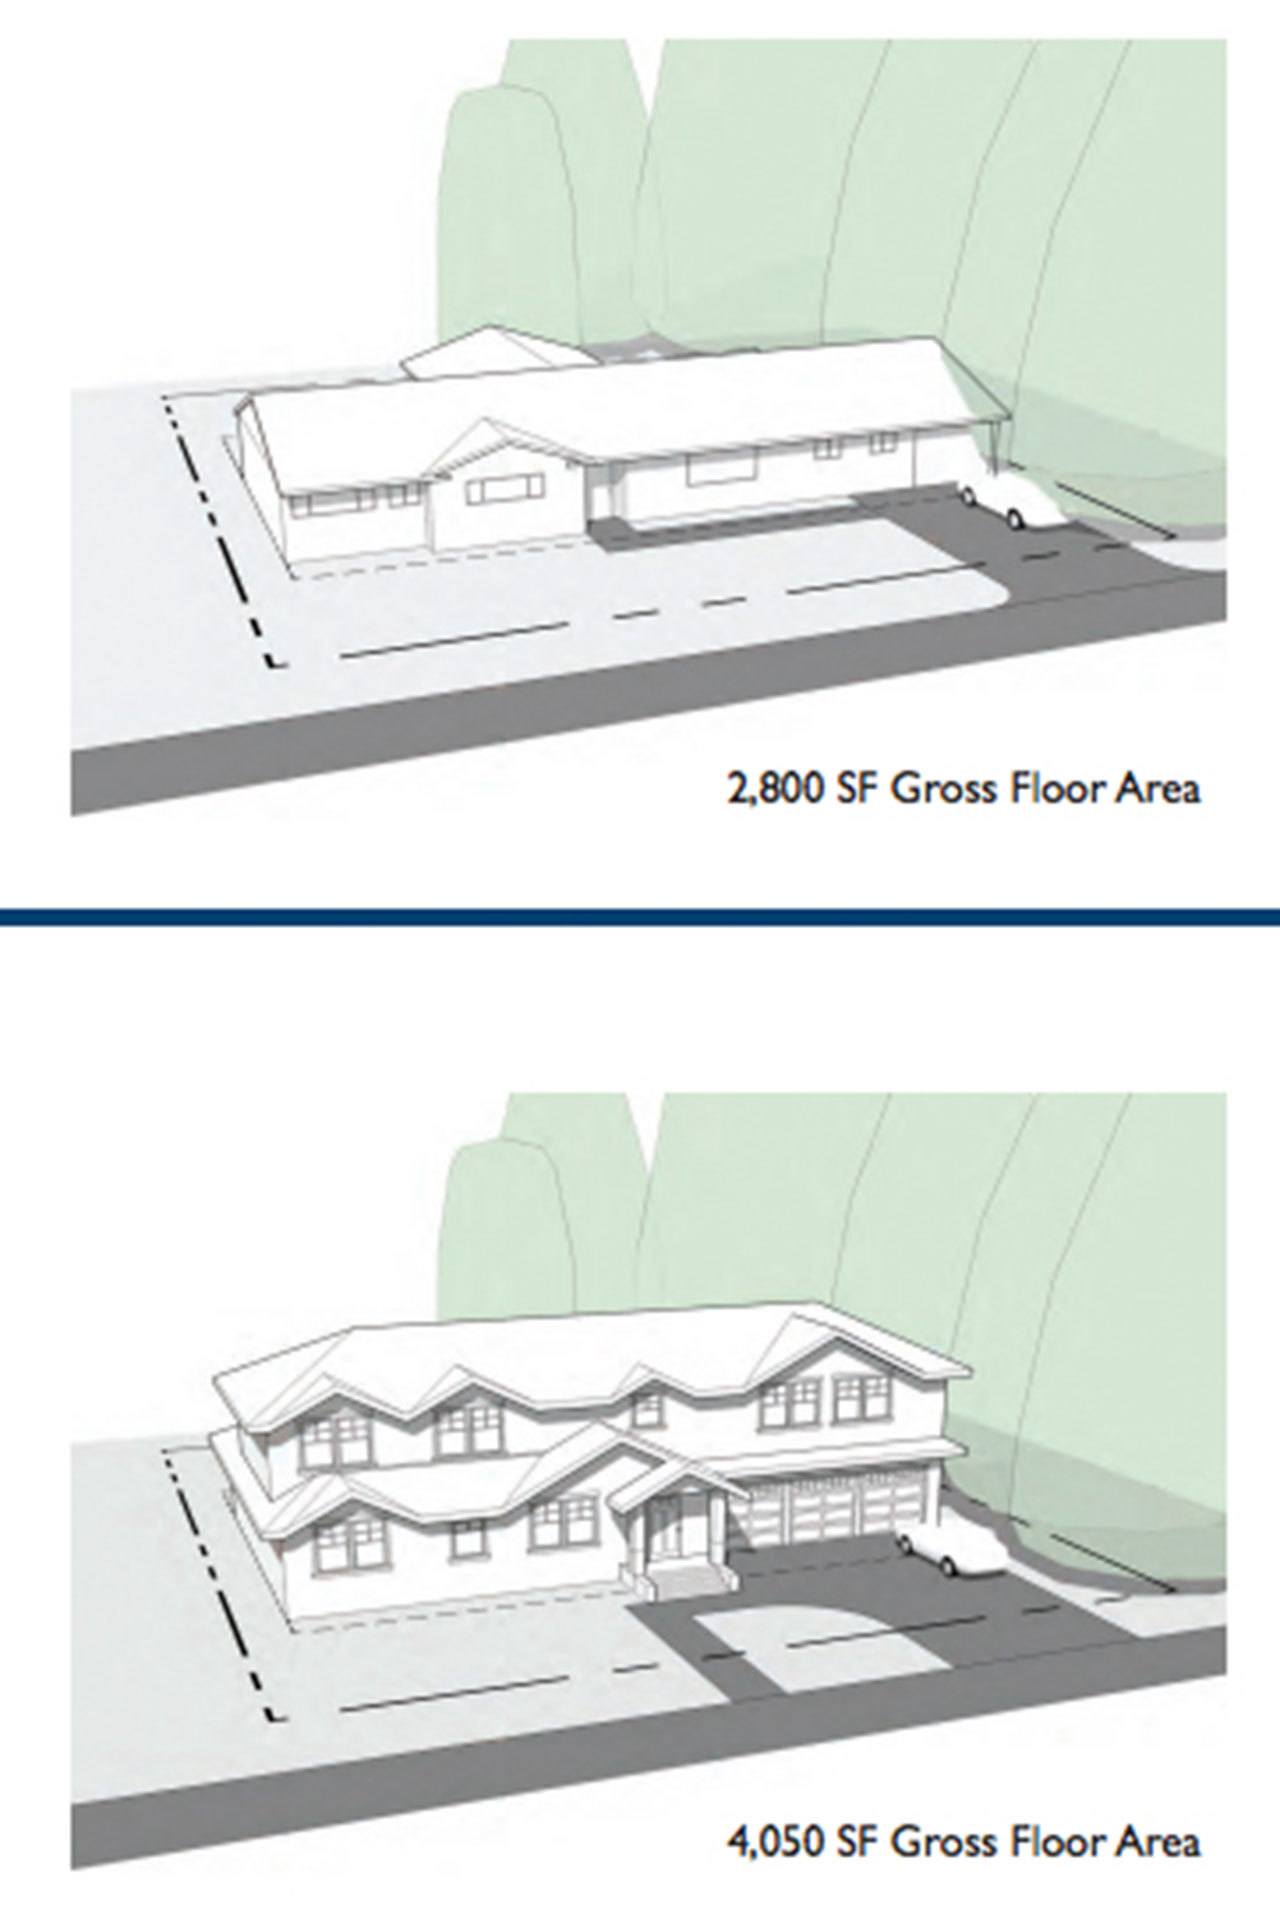 This graphic shows the current conditions (top) and maximum development (bottom) on a 9,000 square foot lot under the current Mercer Island residential code. Contributed image